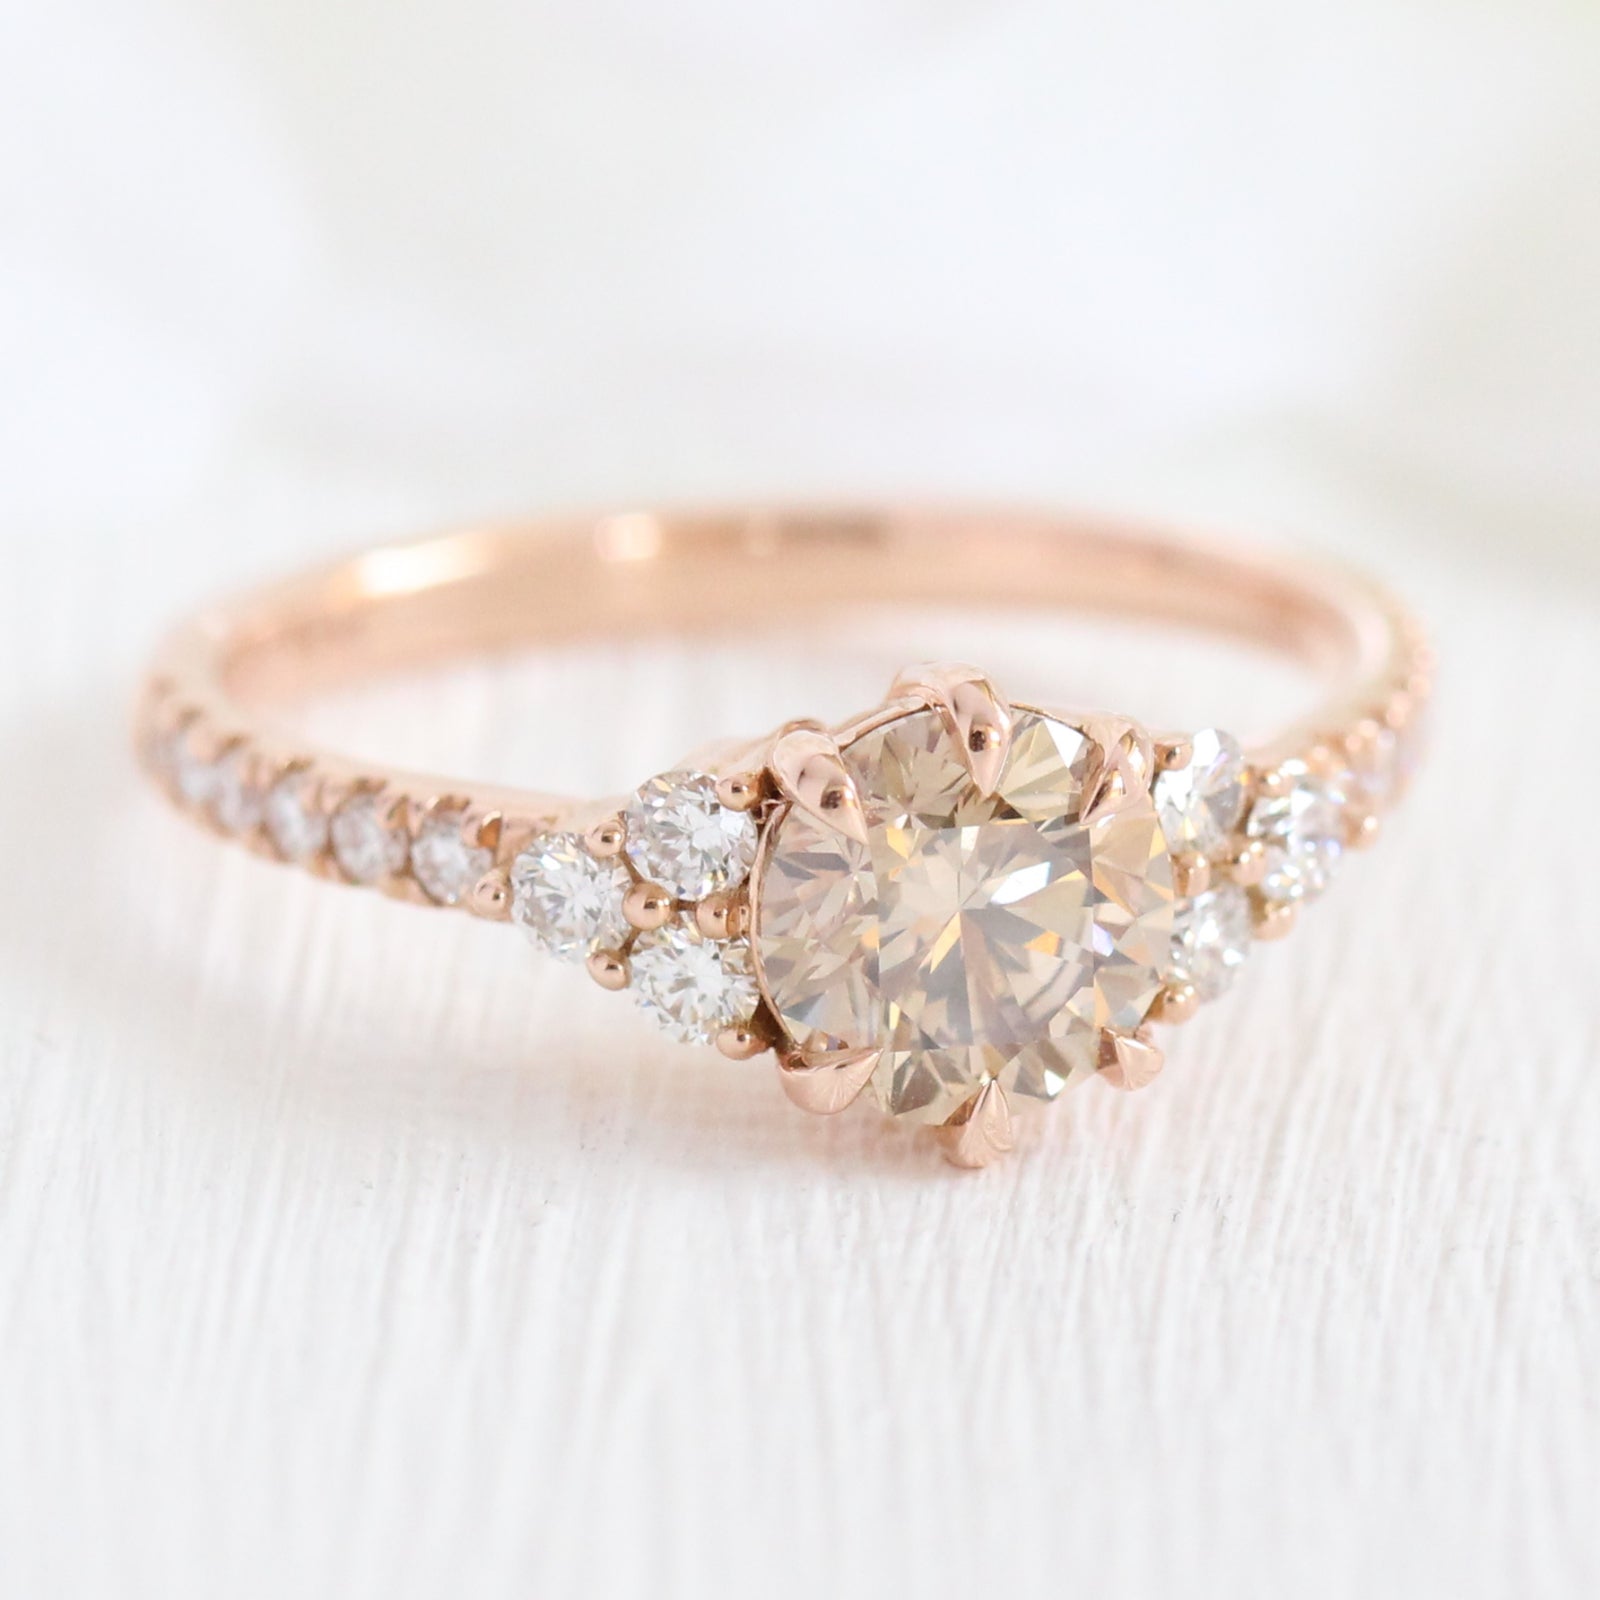 Champagne Diamond Engagement Ring in Rose Gold 3 Stone Ring by La More Design Jewelry